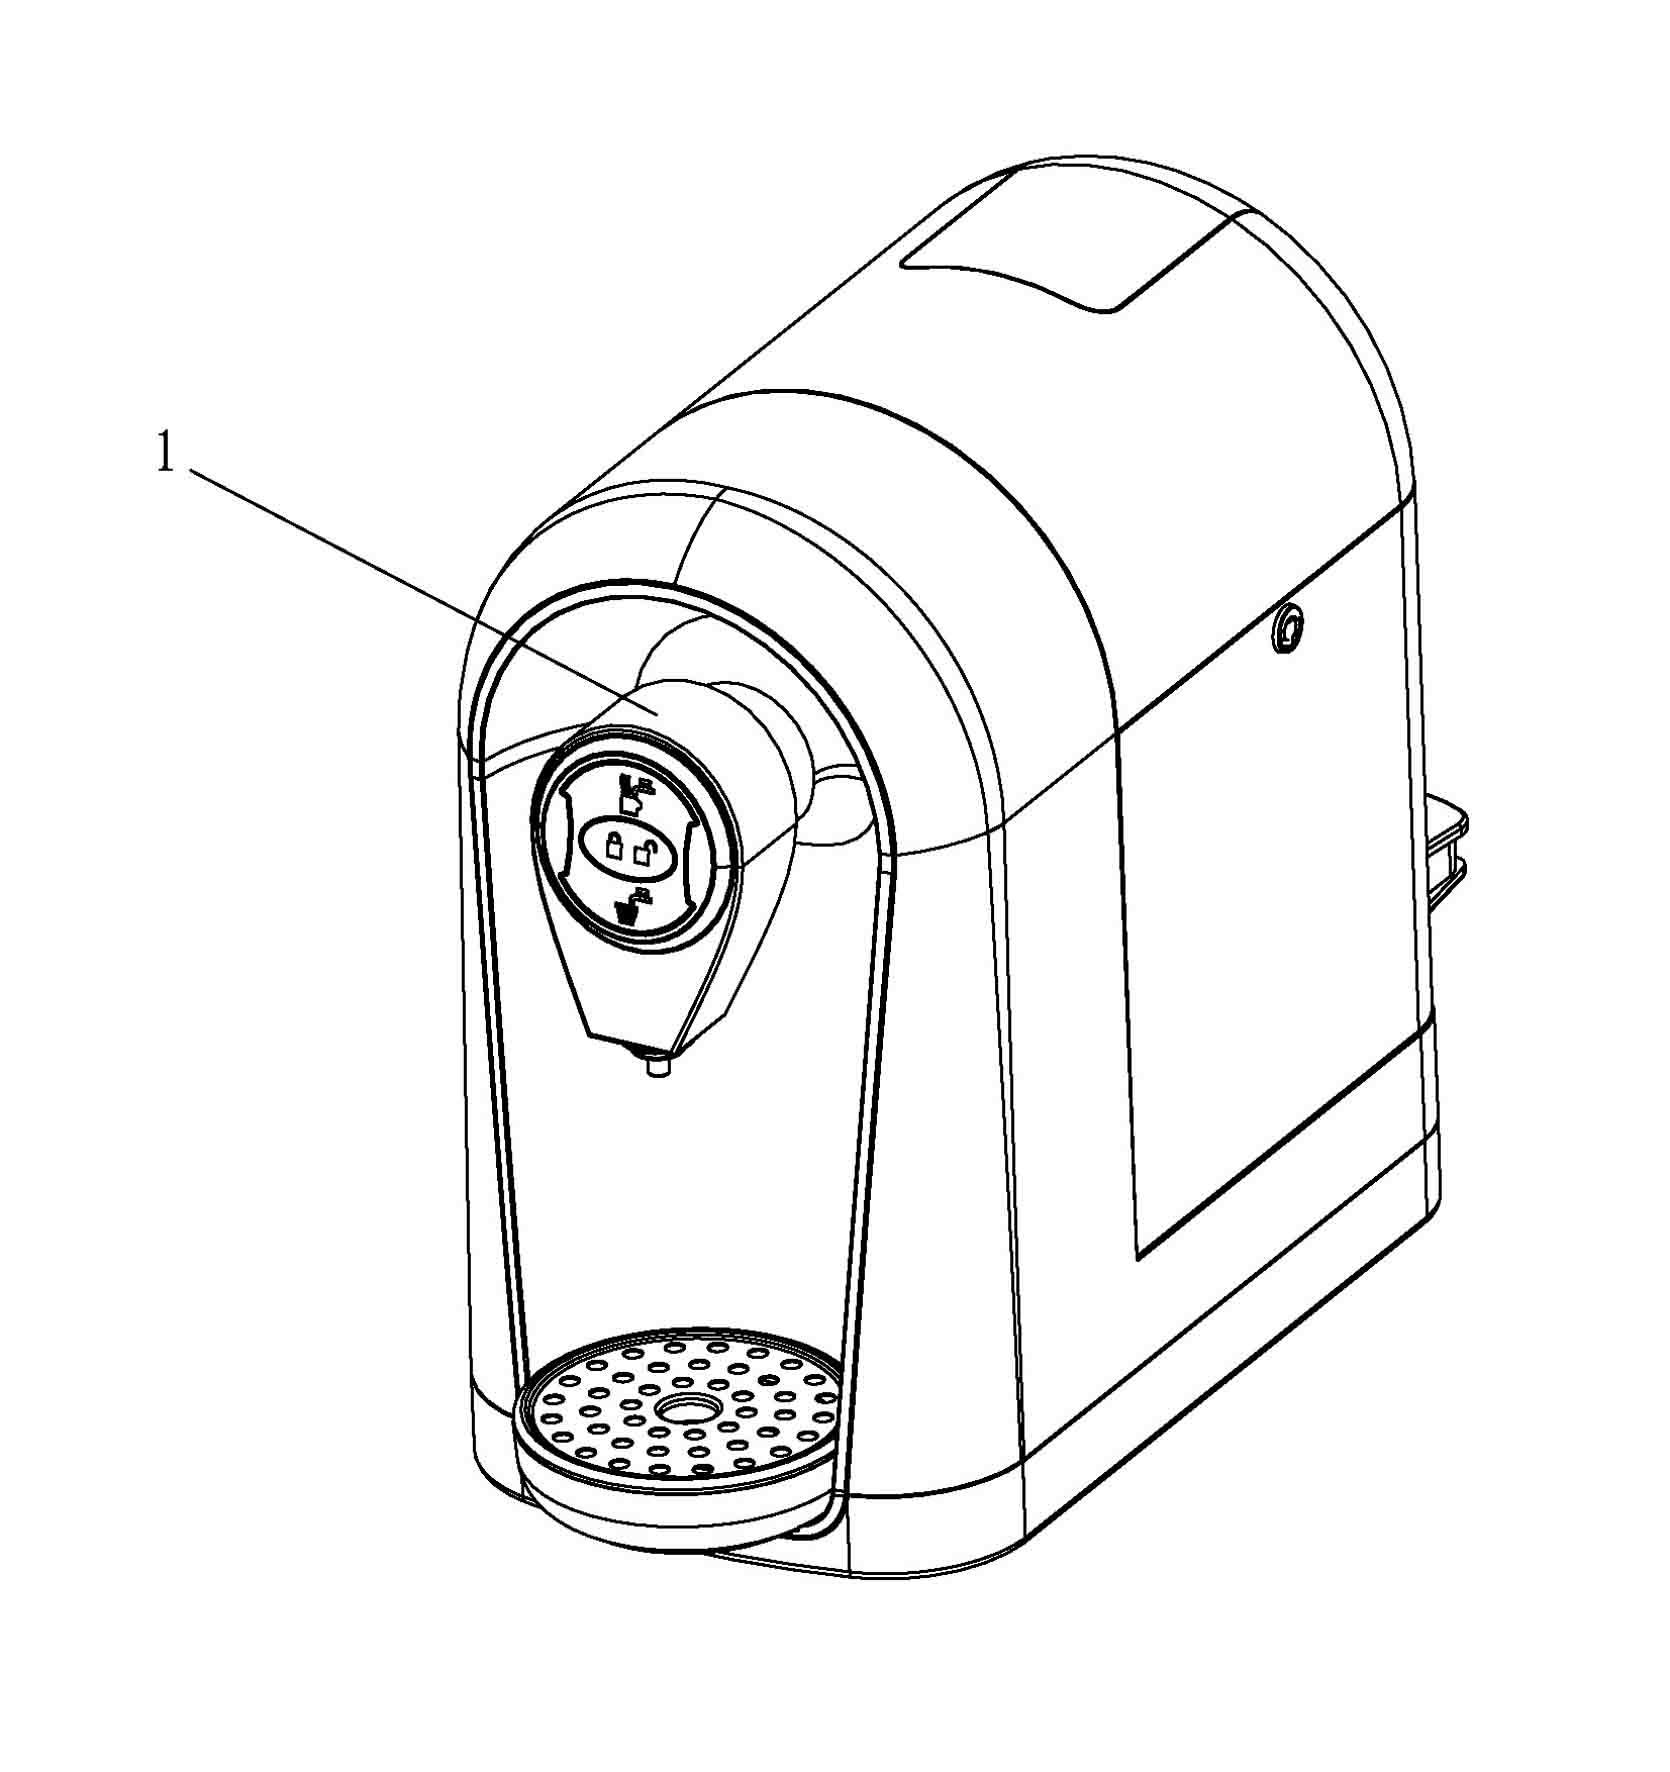 Water outlet port structure for water dispenser